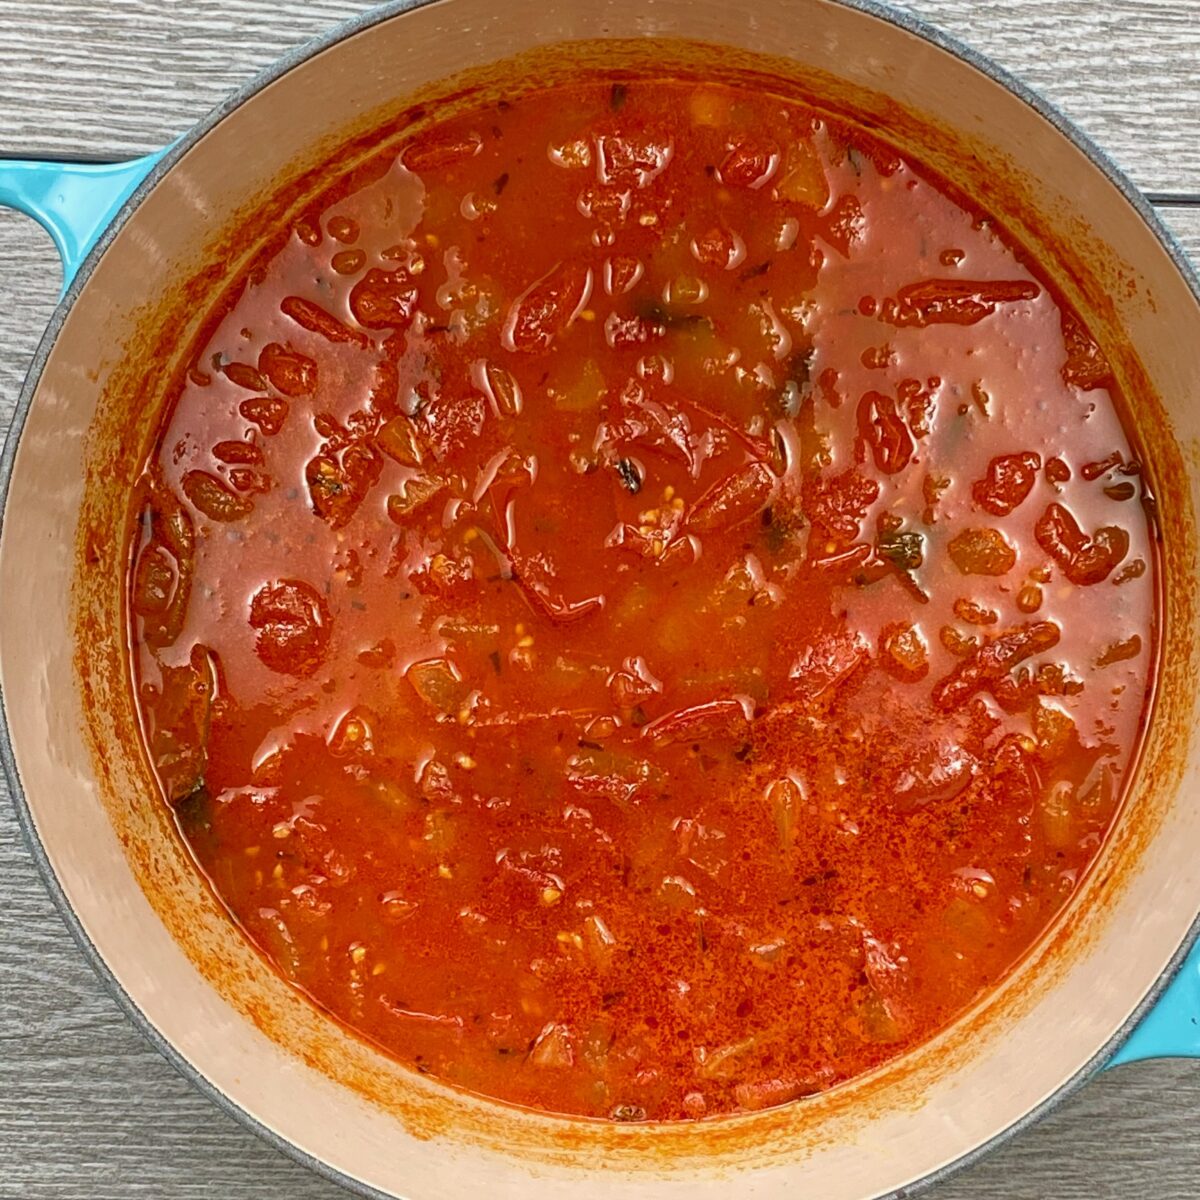 Top view of tomato soup after it has simmered looking like a rustic chunky tomato soup.